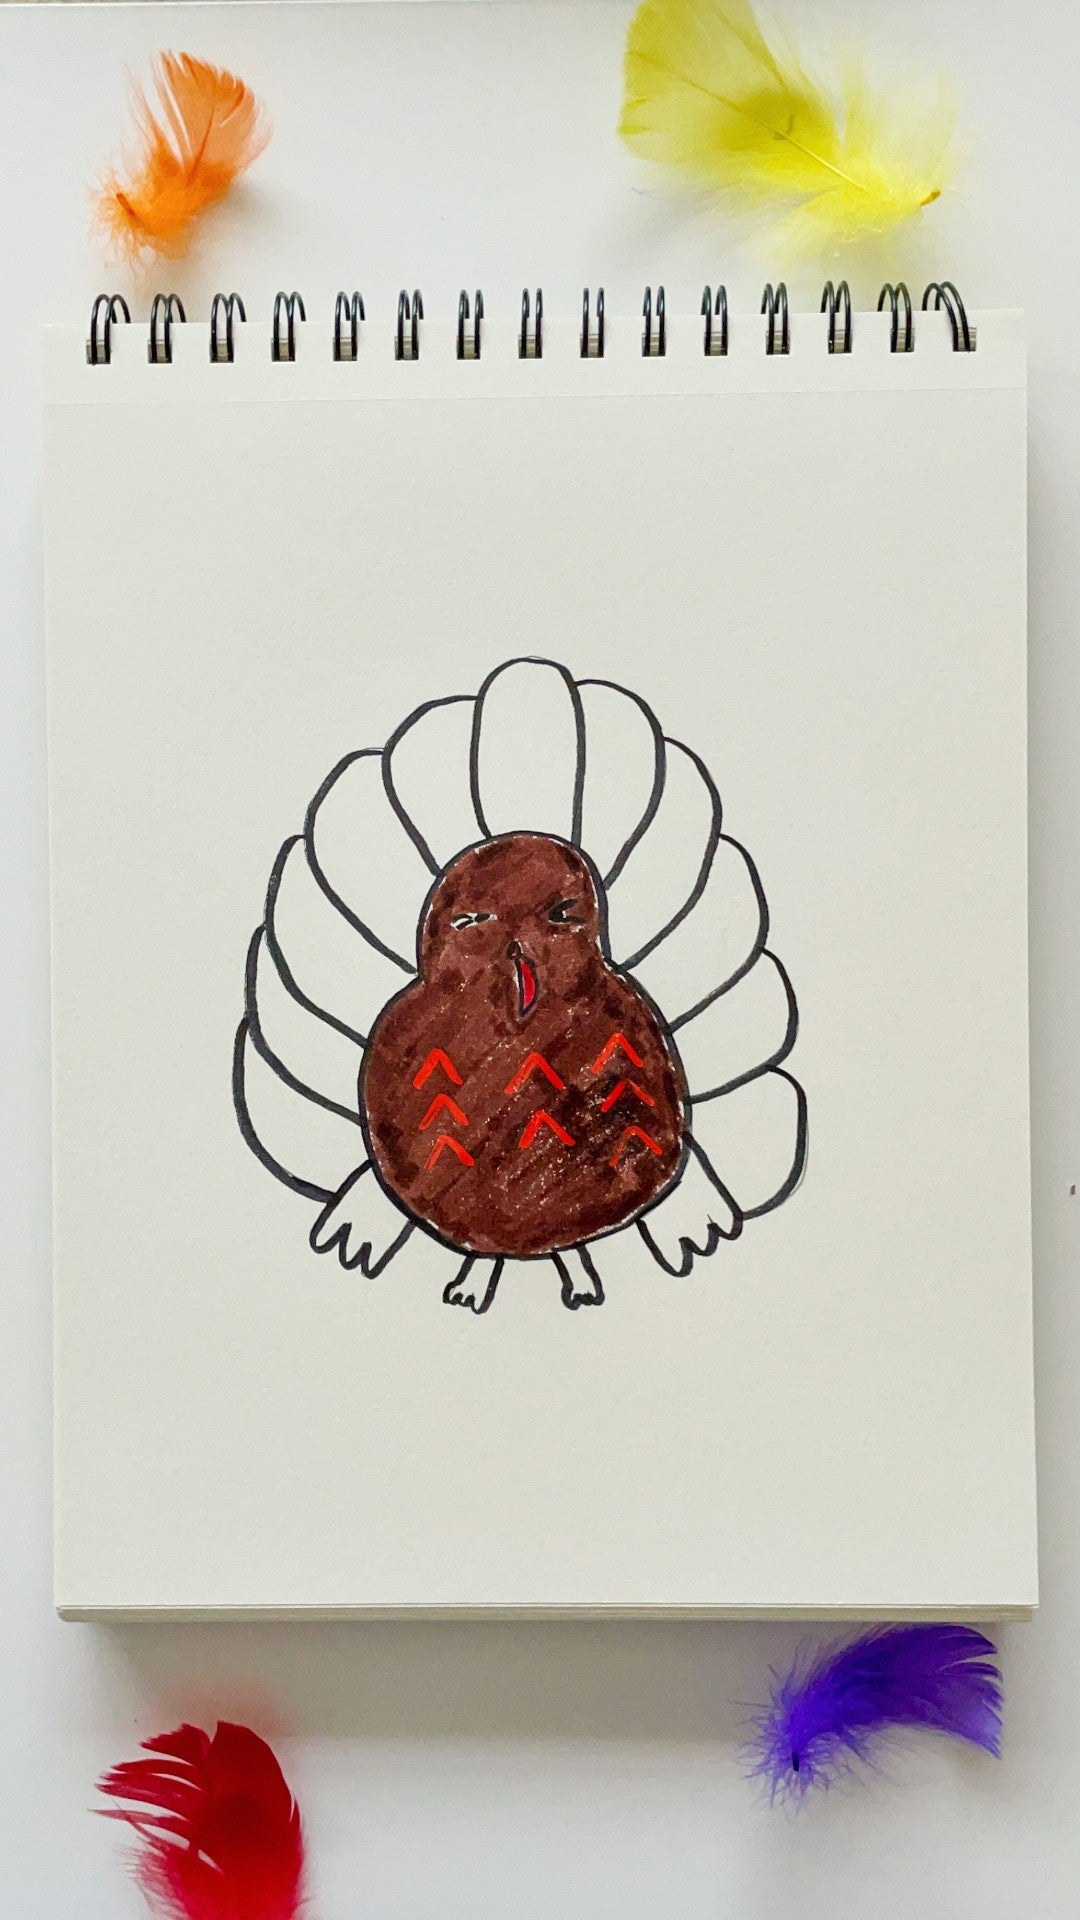 White sketchbook with half colored turkey on white table with colorful feathers